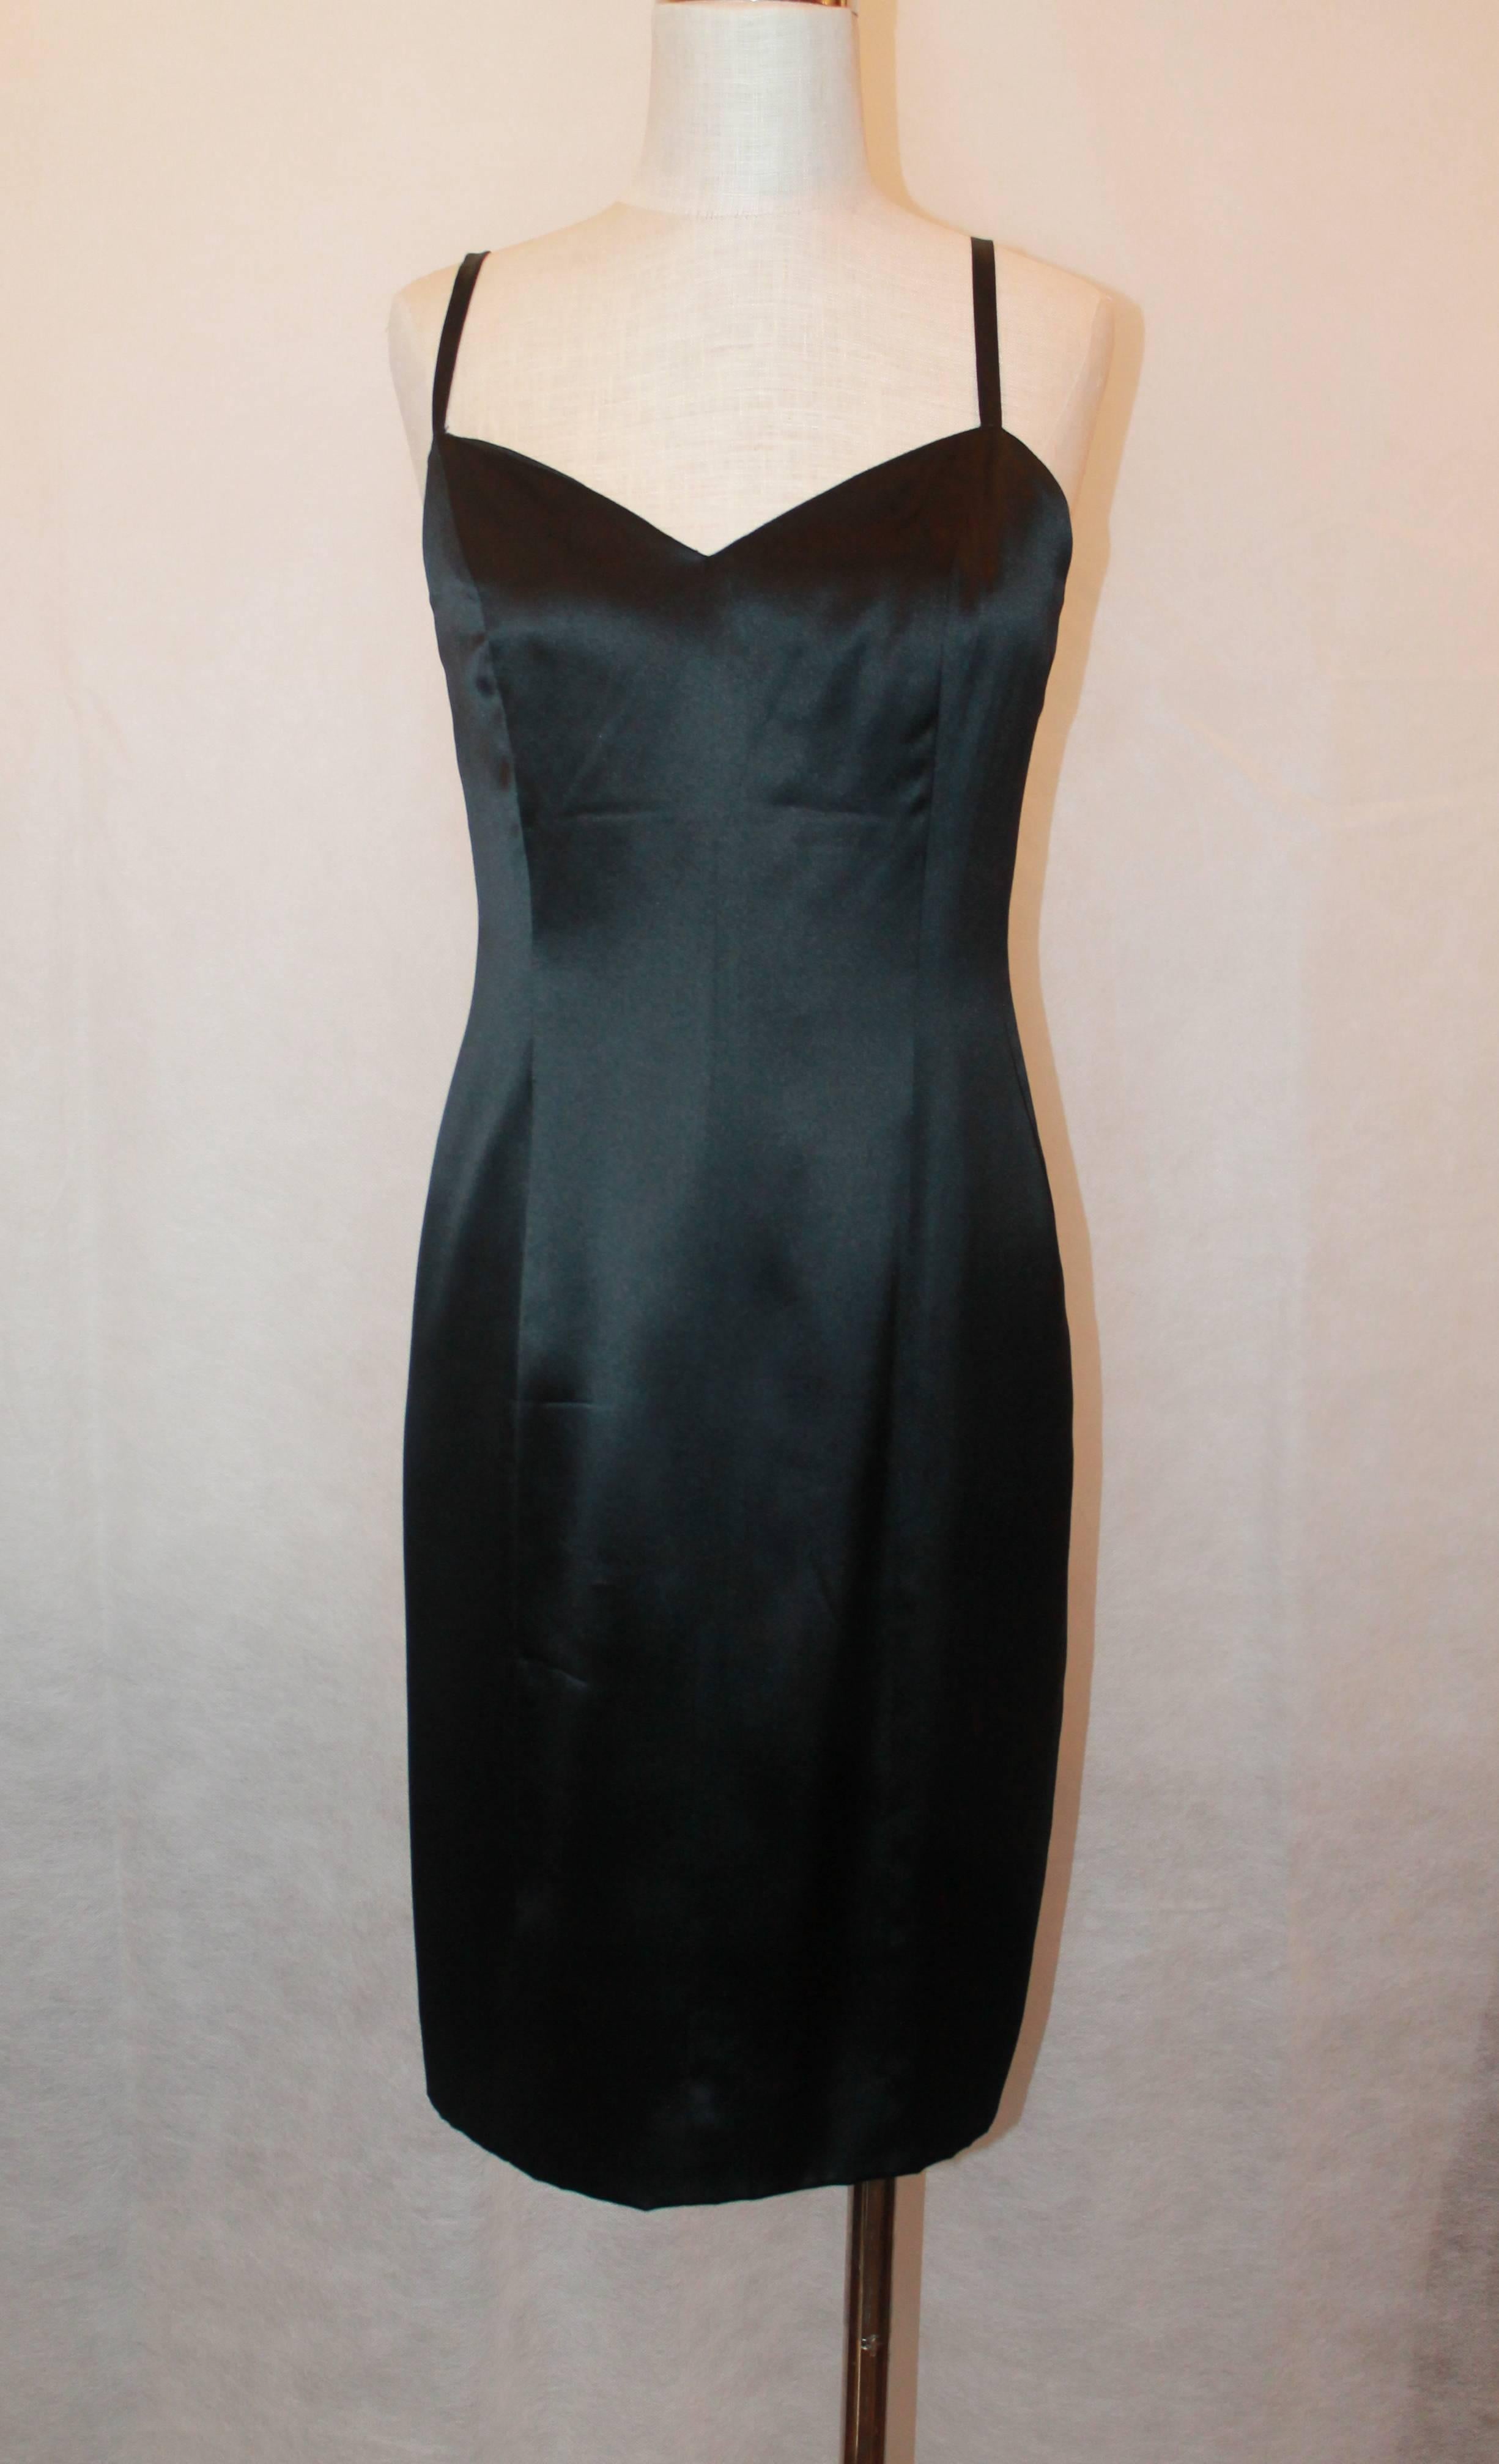 Chanel Black Fitted Silk Slip Dress w/ Spaghetti Straps - 44 - 1995.  This beautiful Chanel dress is in excellent condition.  It features gorgeous black silk, a stunning figure flattering shape, and spaghetti straps.  It was a perfect little black